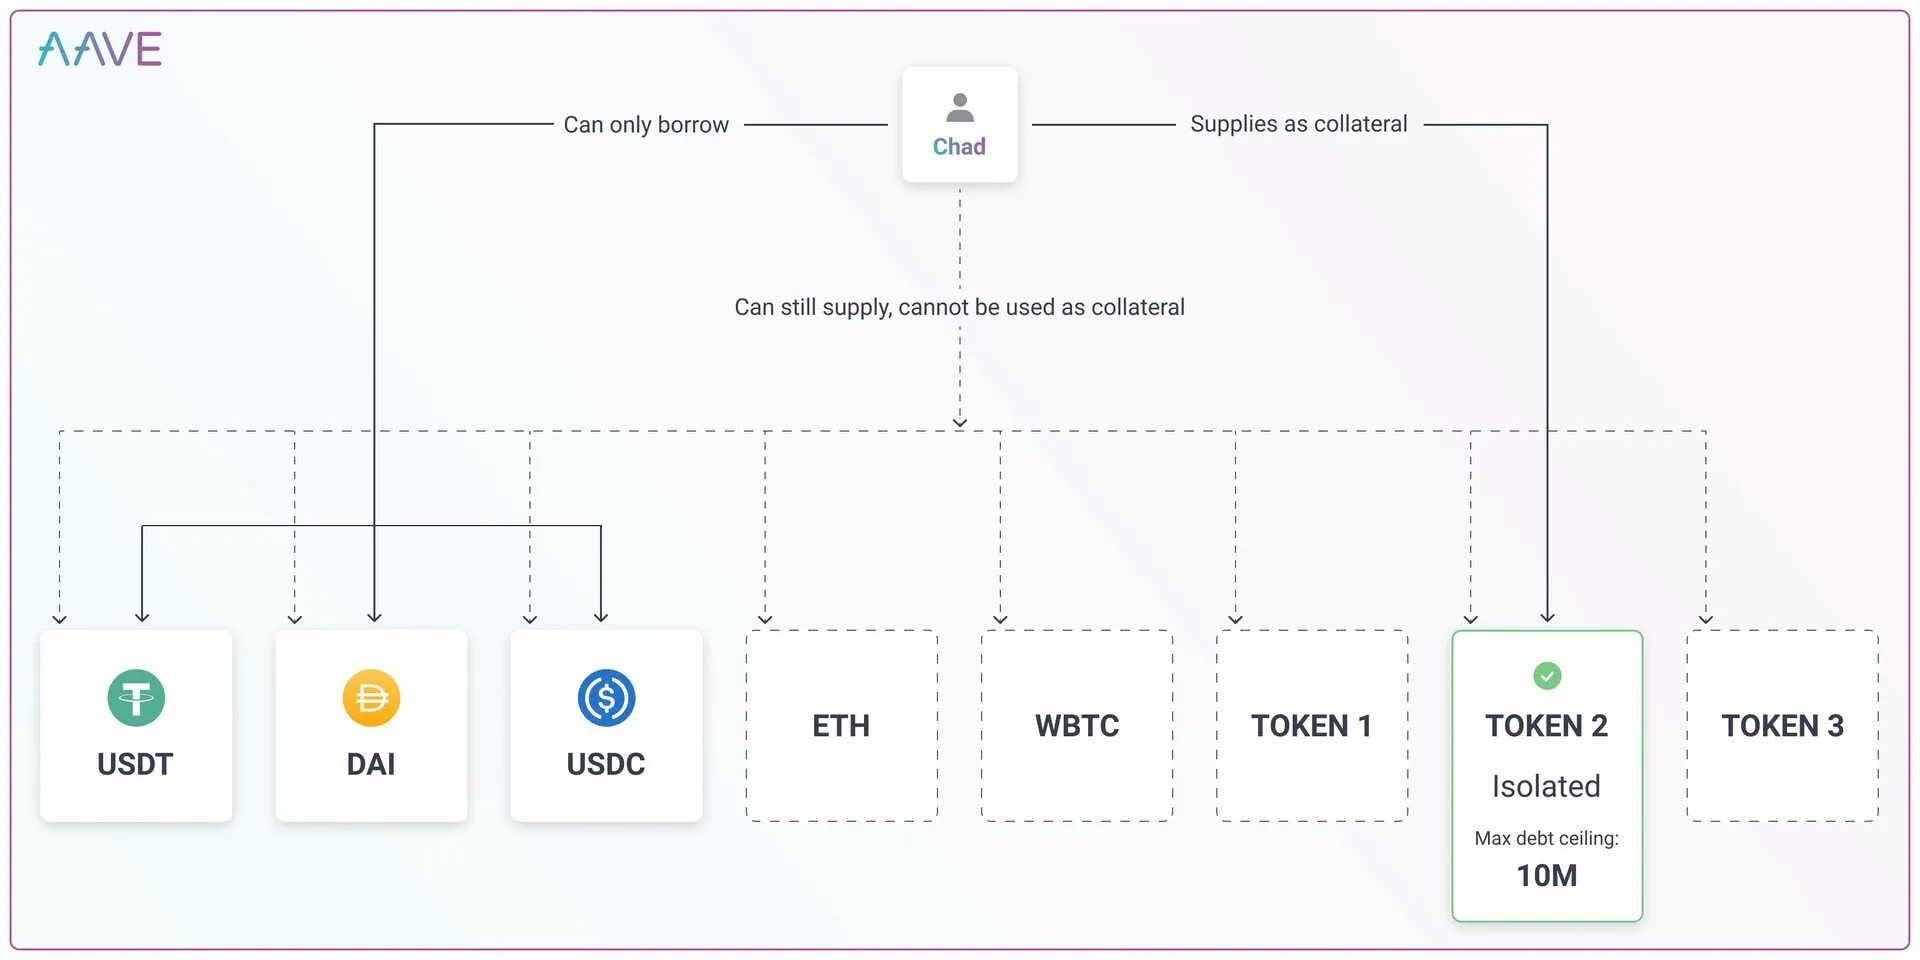 Think of “TOKEN2” as DING in this image. As you can see, Chad is limited in what he can borrow if he decides to deposit DING as collateral (because the asset is so volatile). Source: Aave Governance.